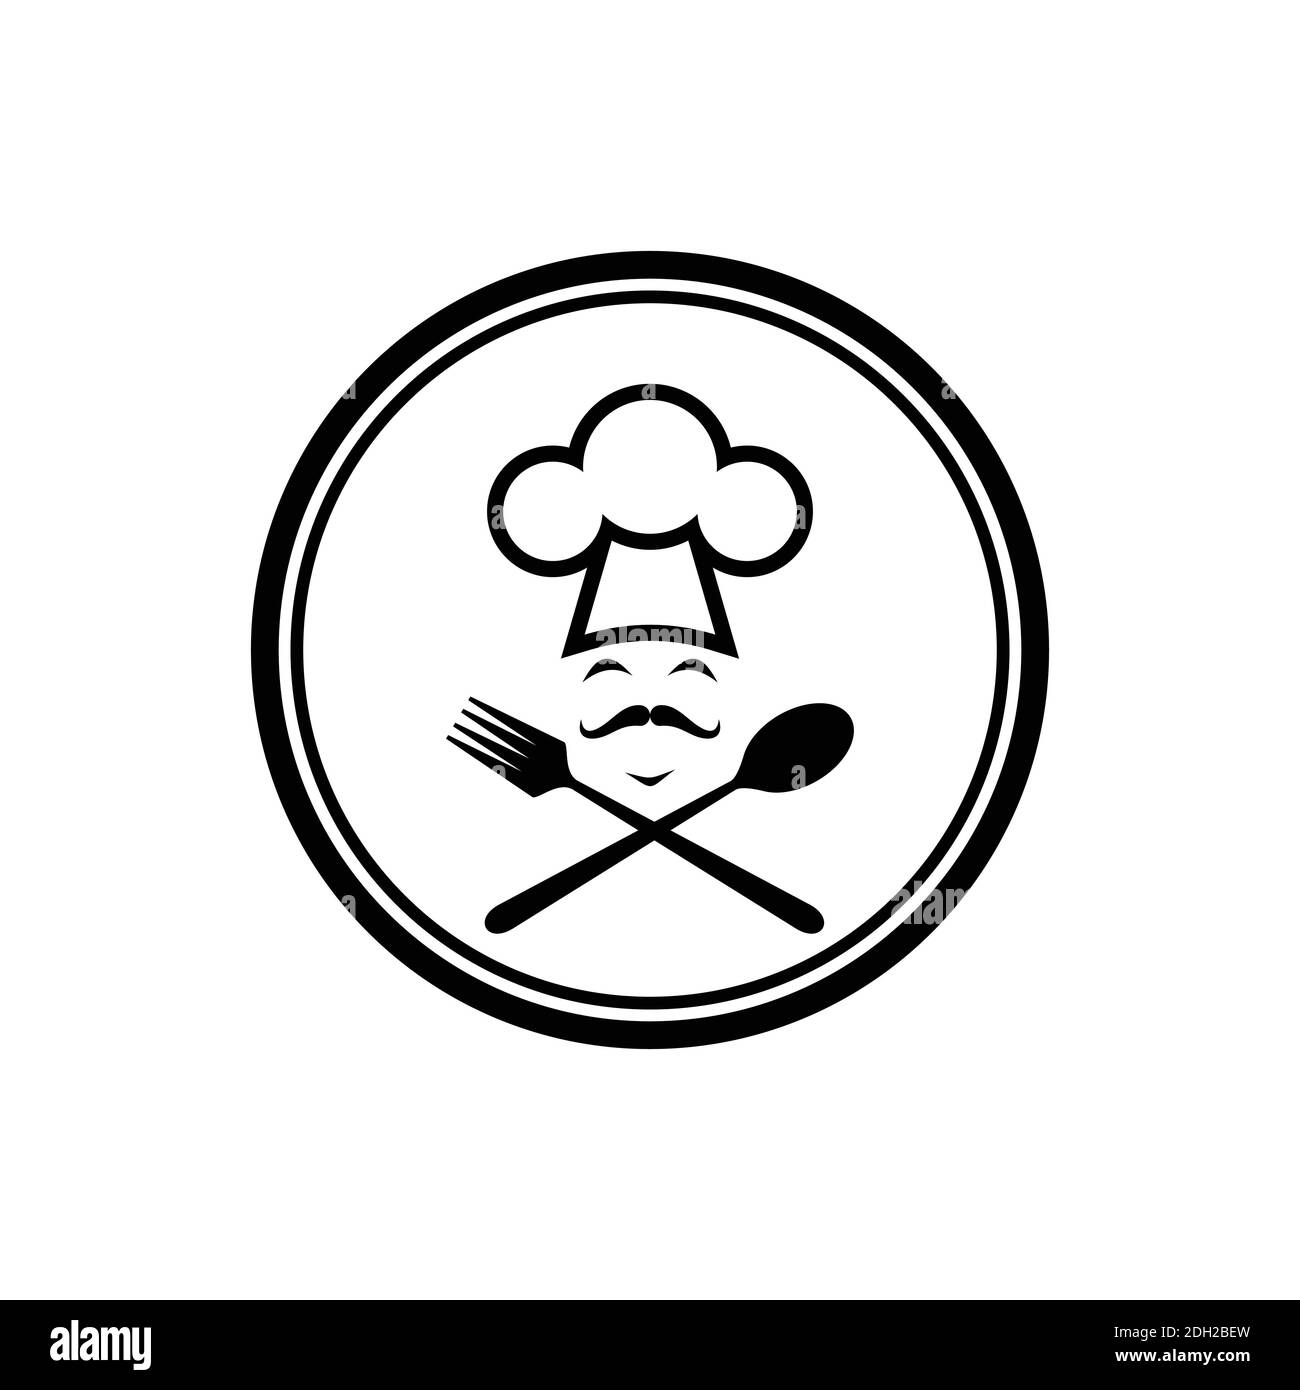 abstract chef kitchener cooky icon logo vector design concept Stock Vector